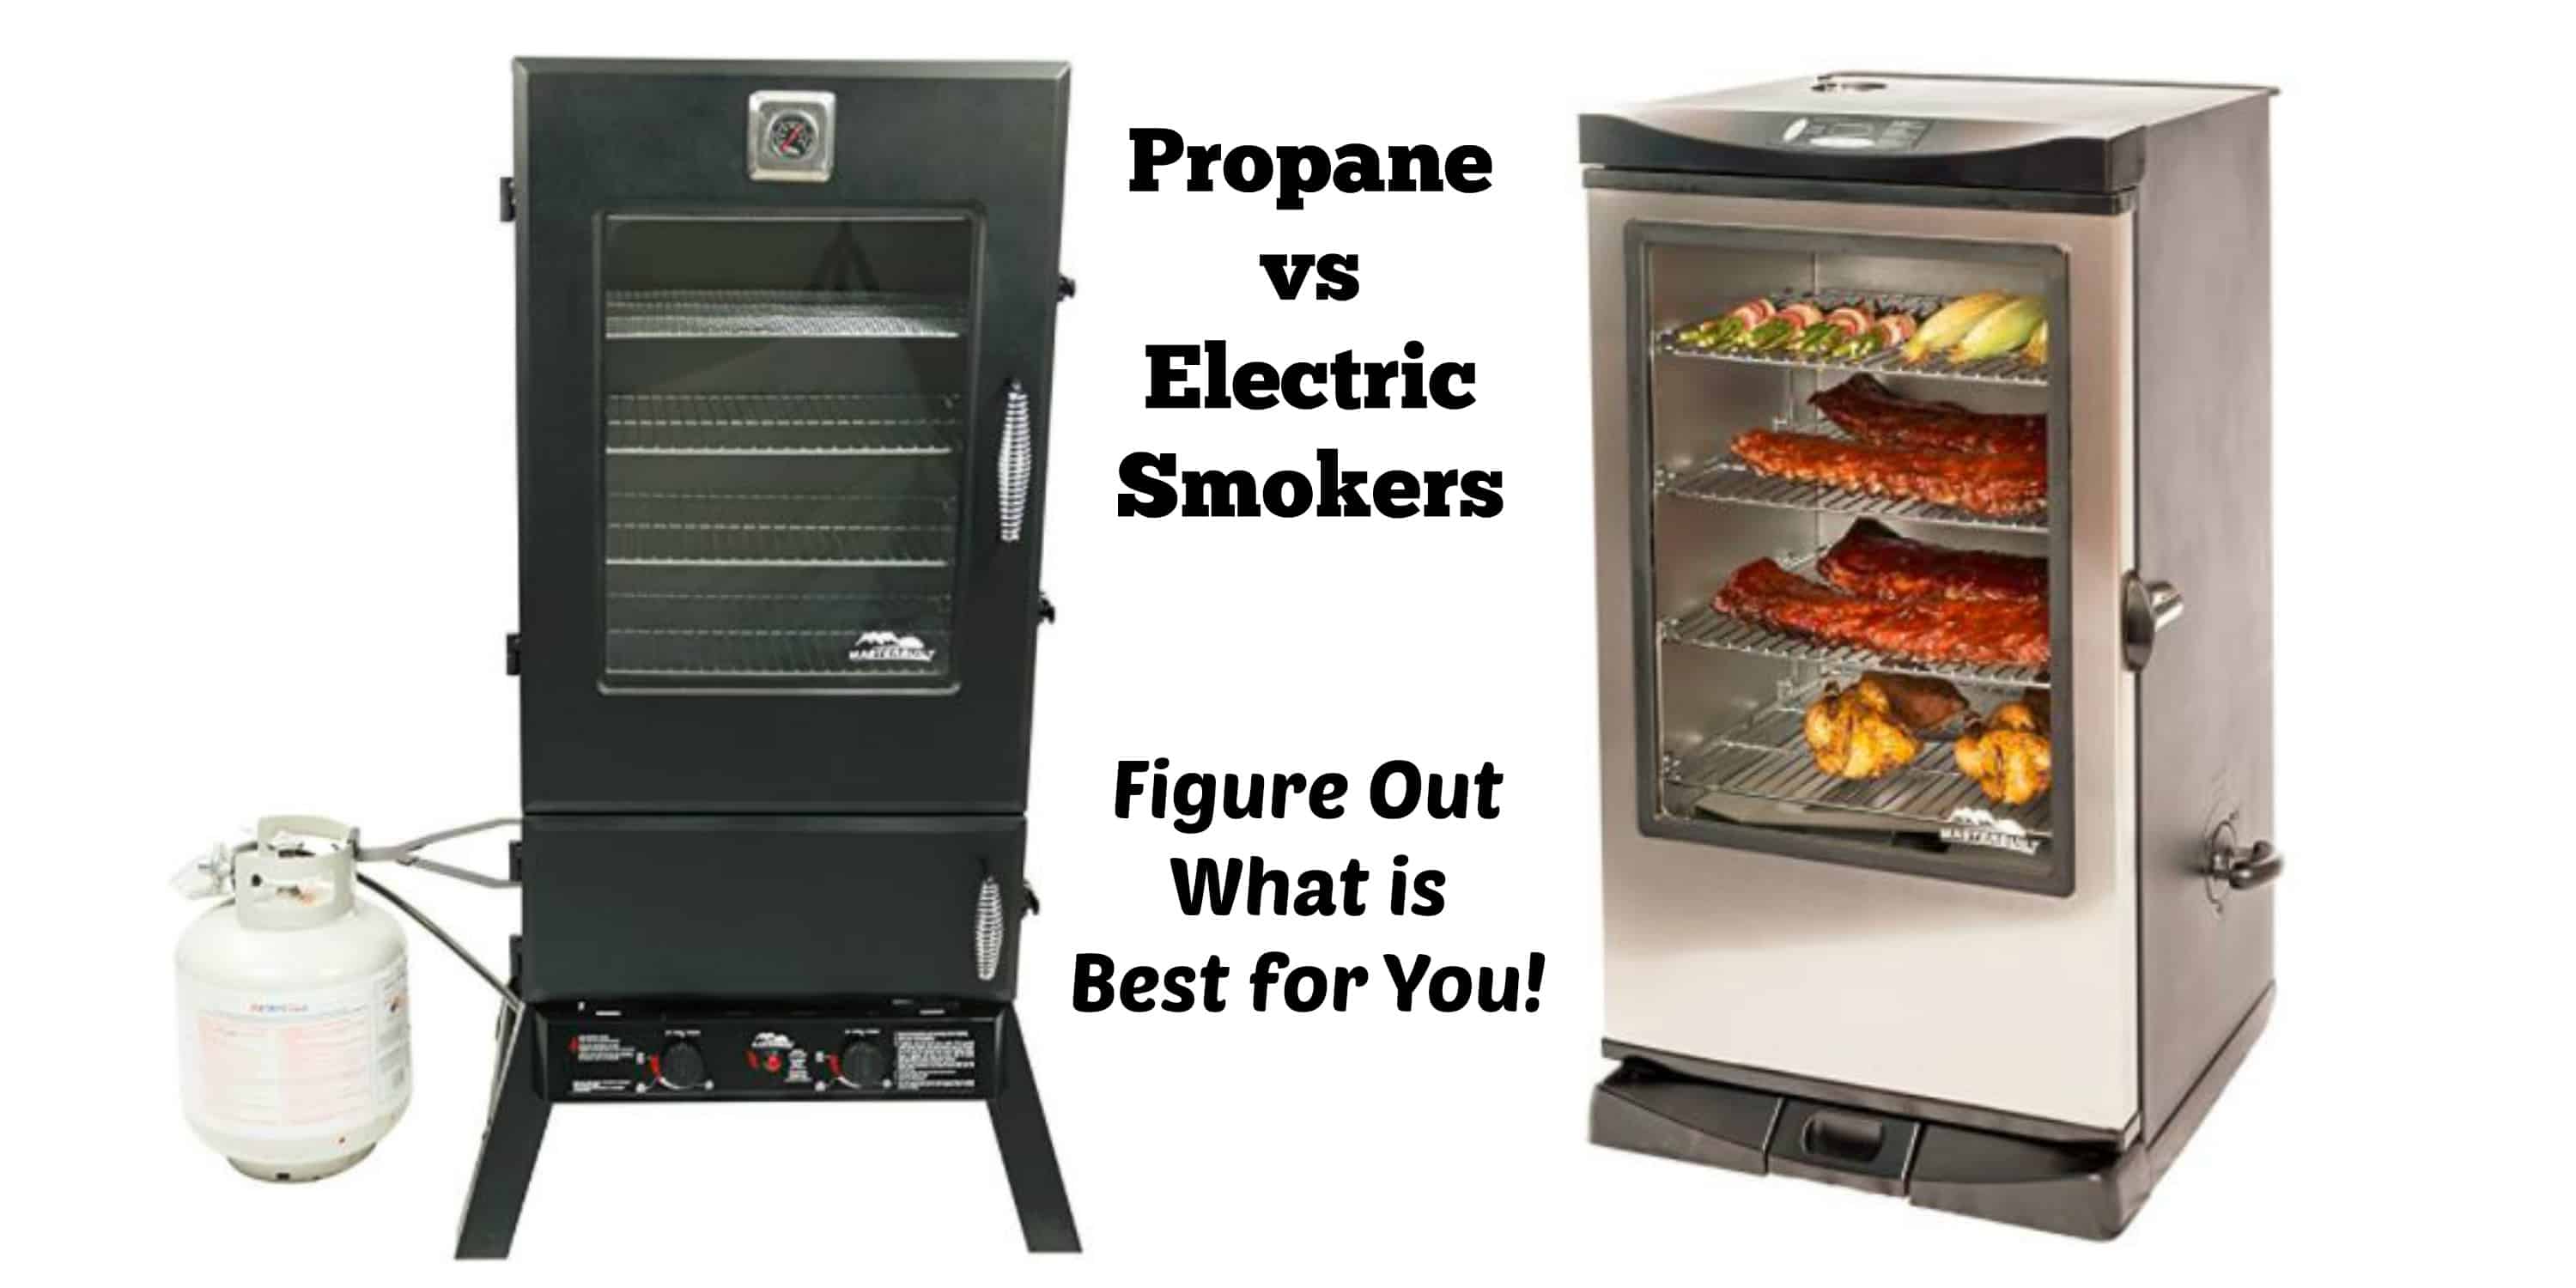 Do Electric Smokers Use a Lot of Electricity? 